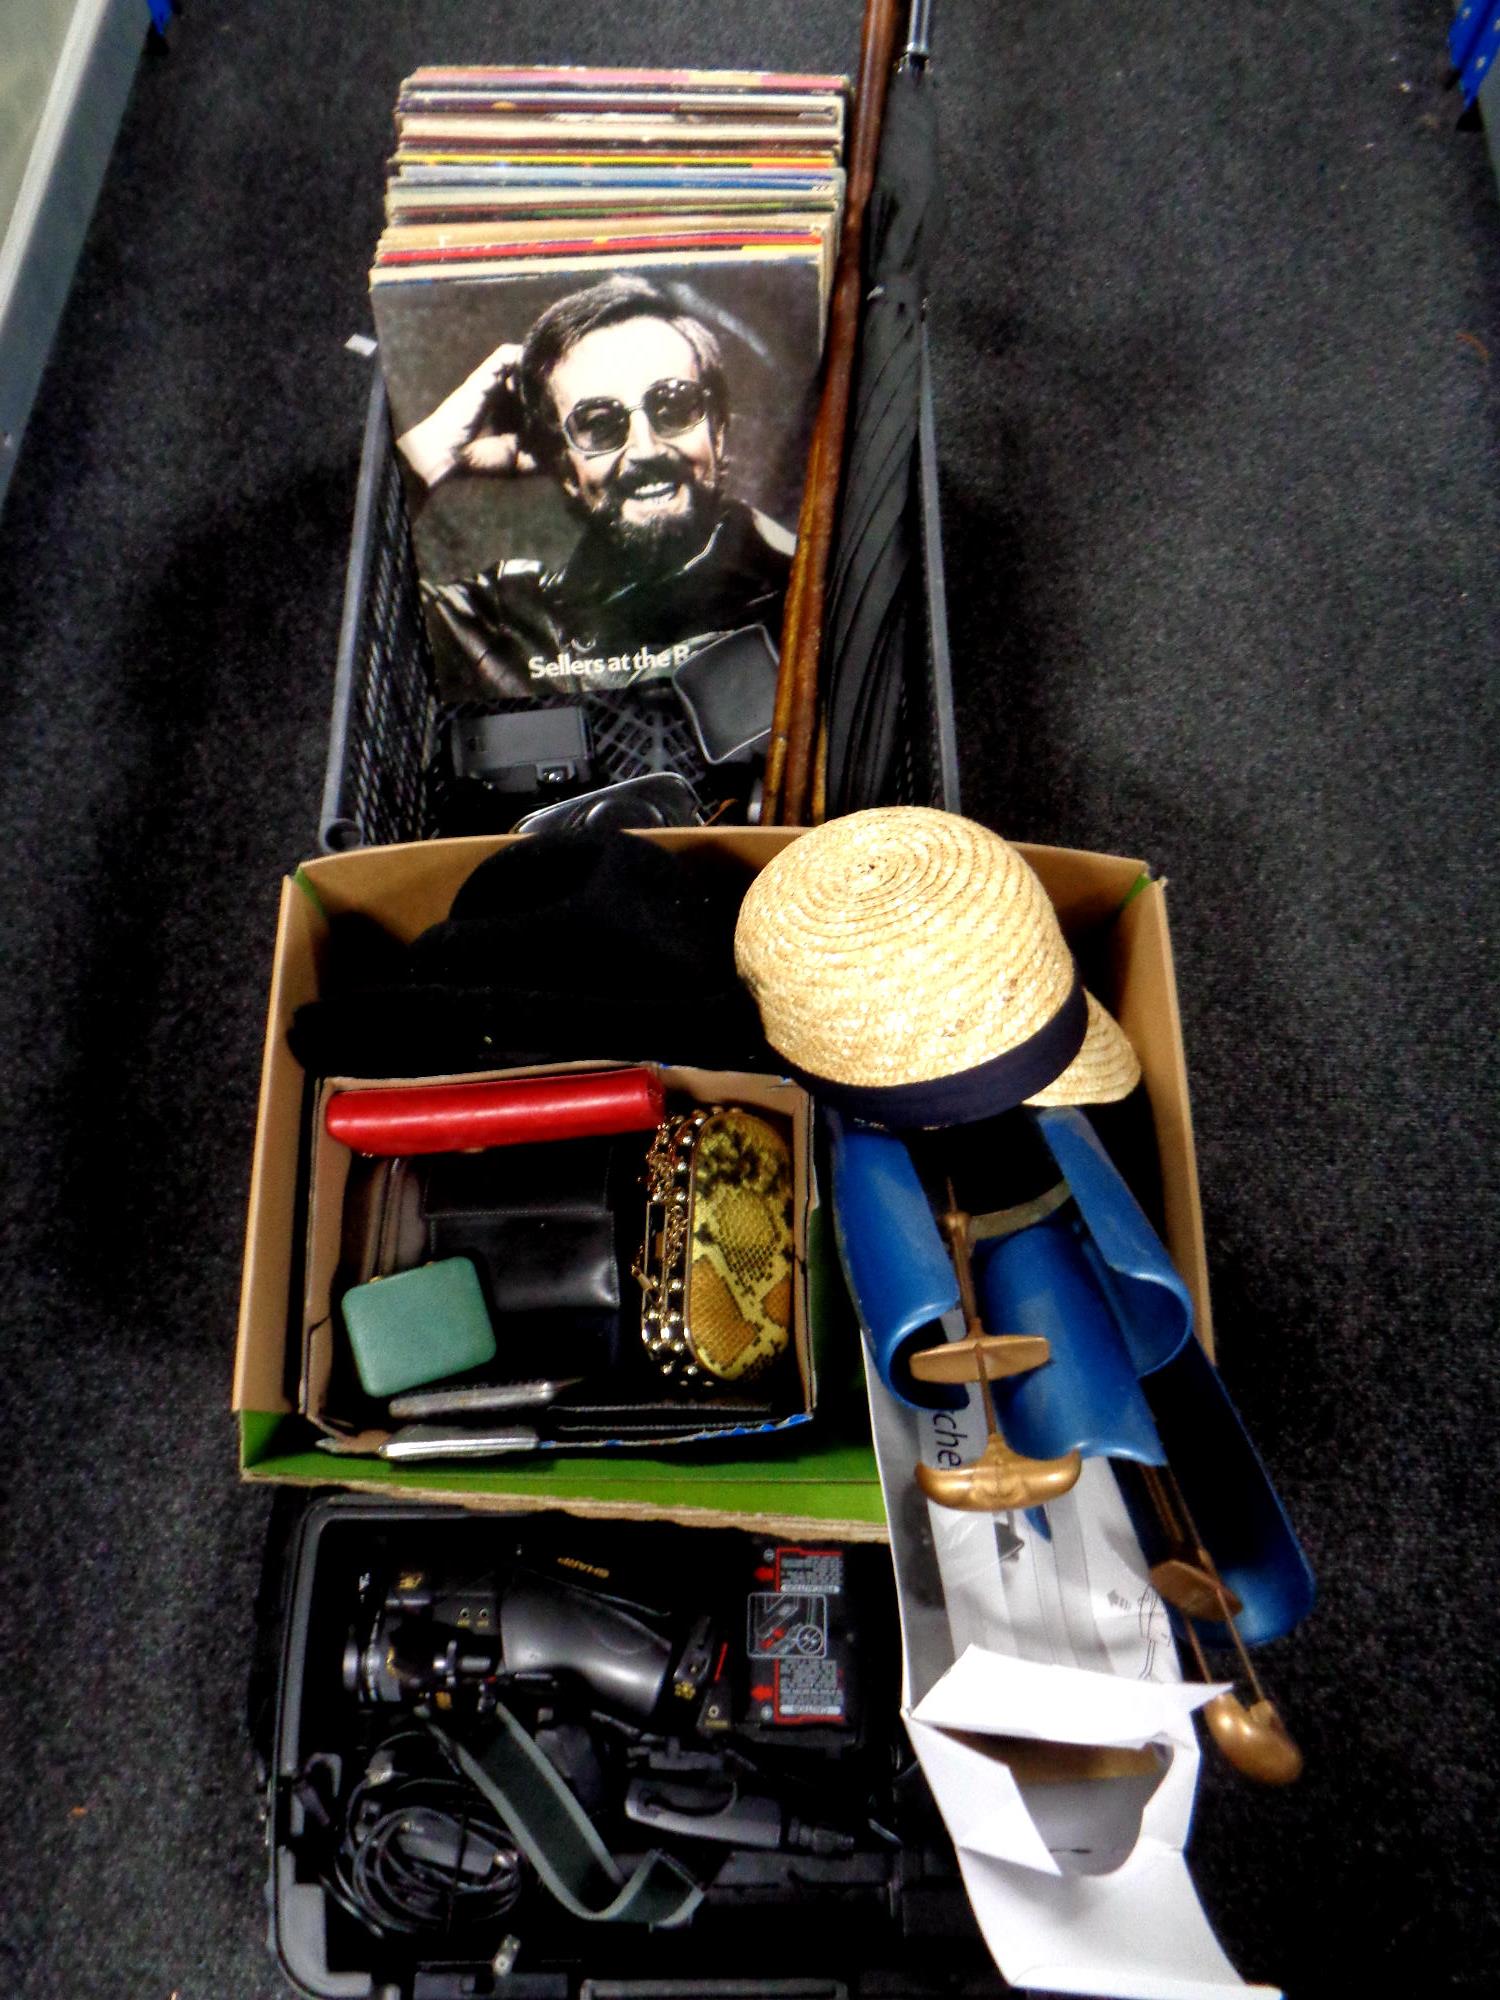 A box and crate of vinyl LP's, walking sticks, video camera, cameras,